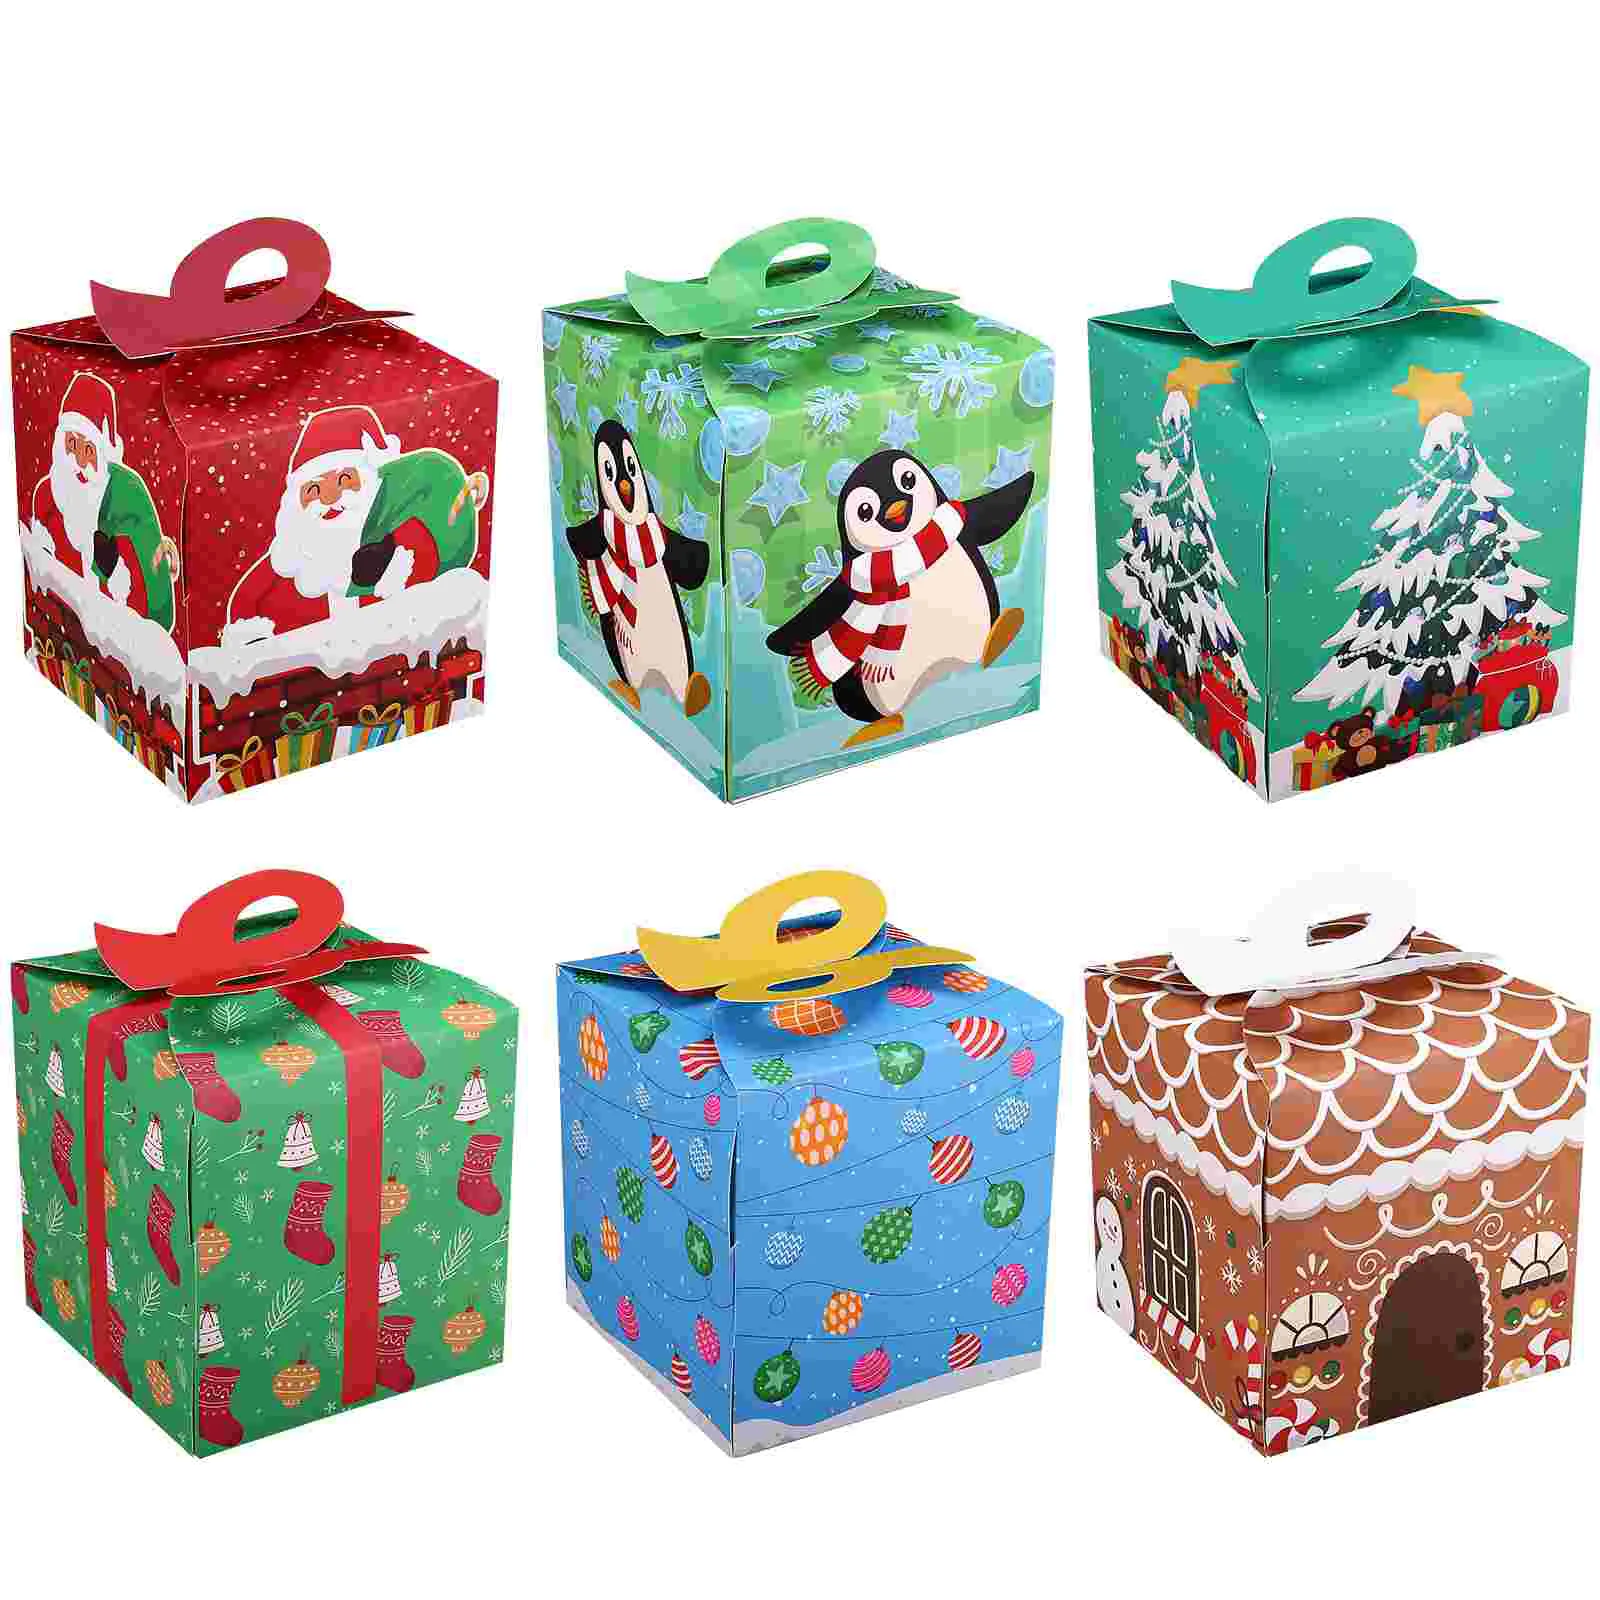 

Cabilock 24pcs Christmas Gift Boxes Festive Xmas Goodie Paper Boxes Lightweight Candy Treat Cardboard Cookie Boxes for